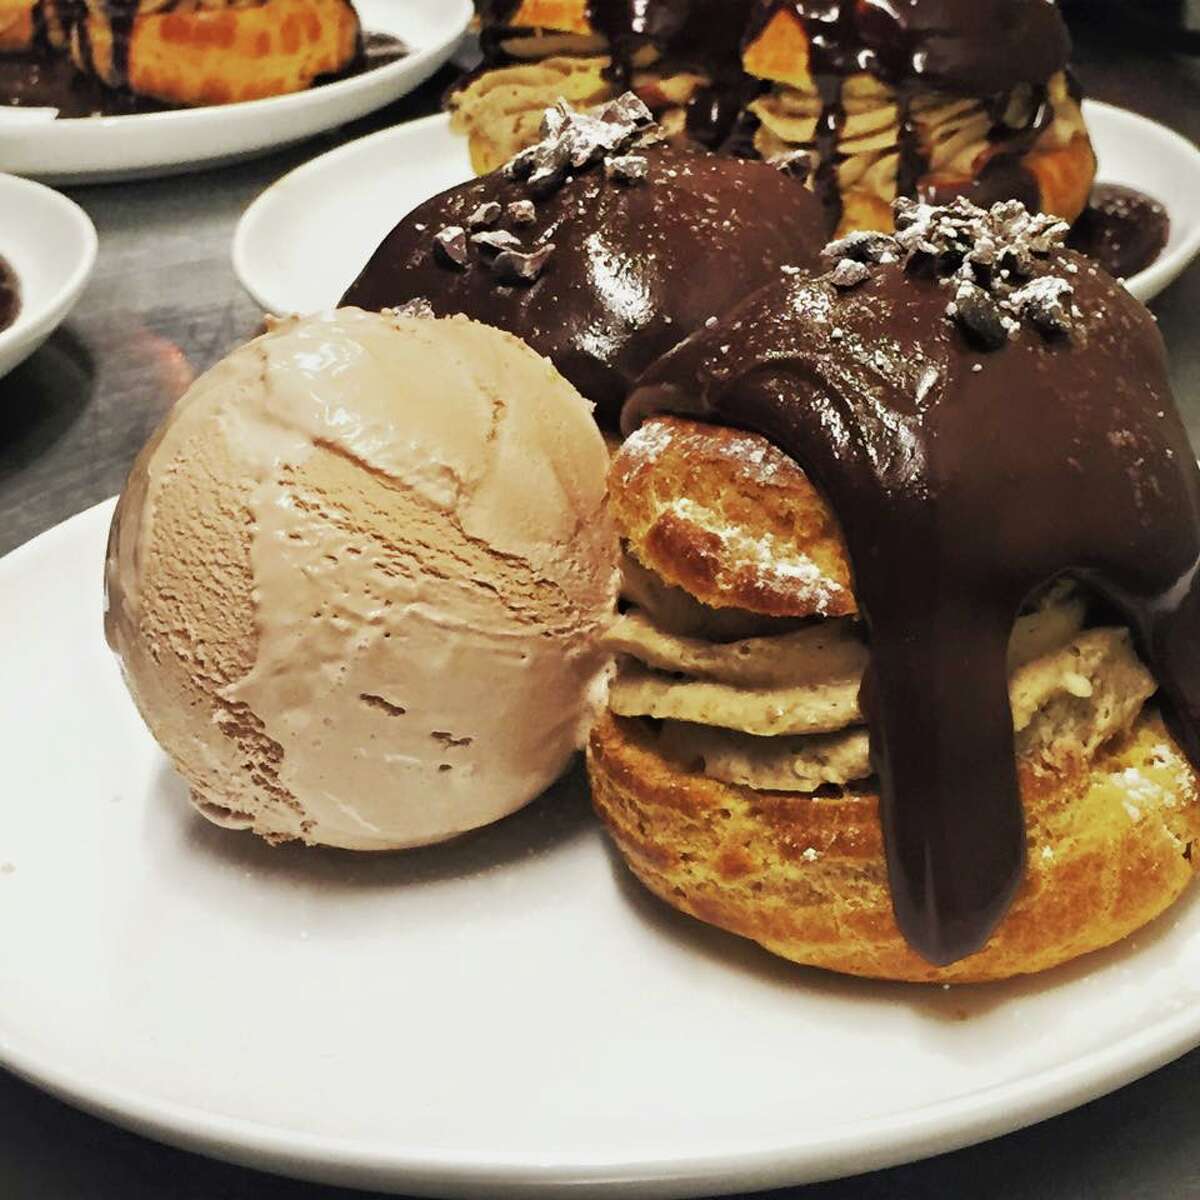 Kicking off Culinaria Festival this week, Boiler House treated diners to a profiterole filled with mascarpone-coffee mousse, espresso ganache, smoked nutella ice cream.